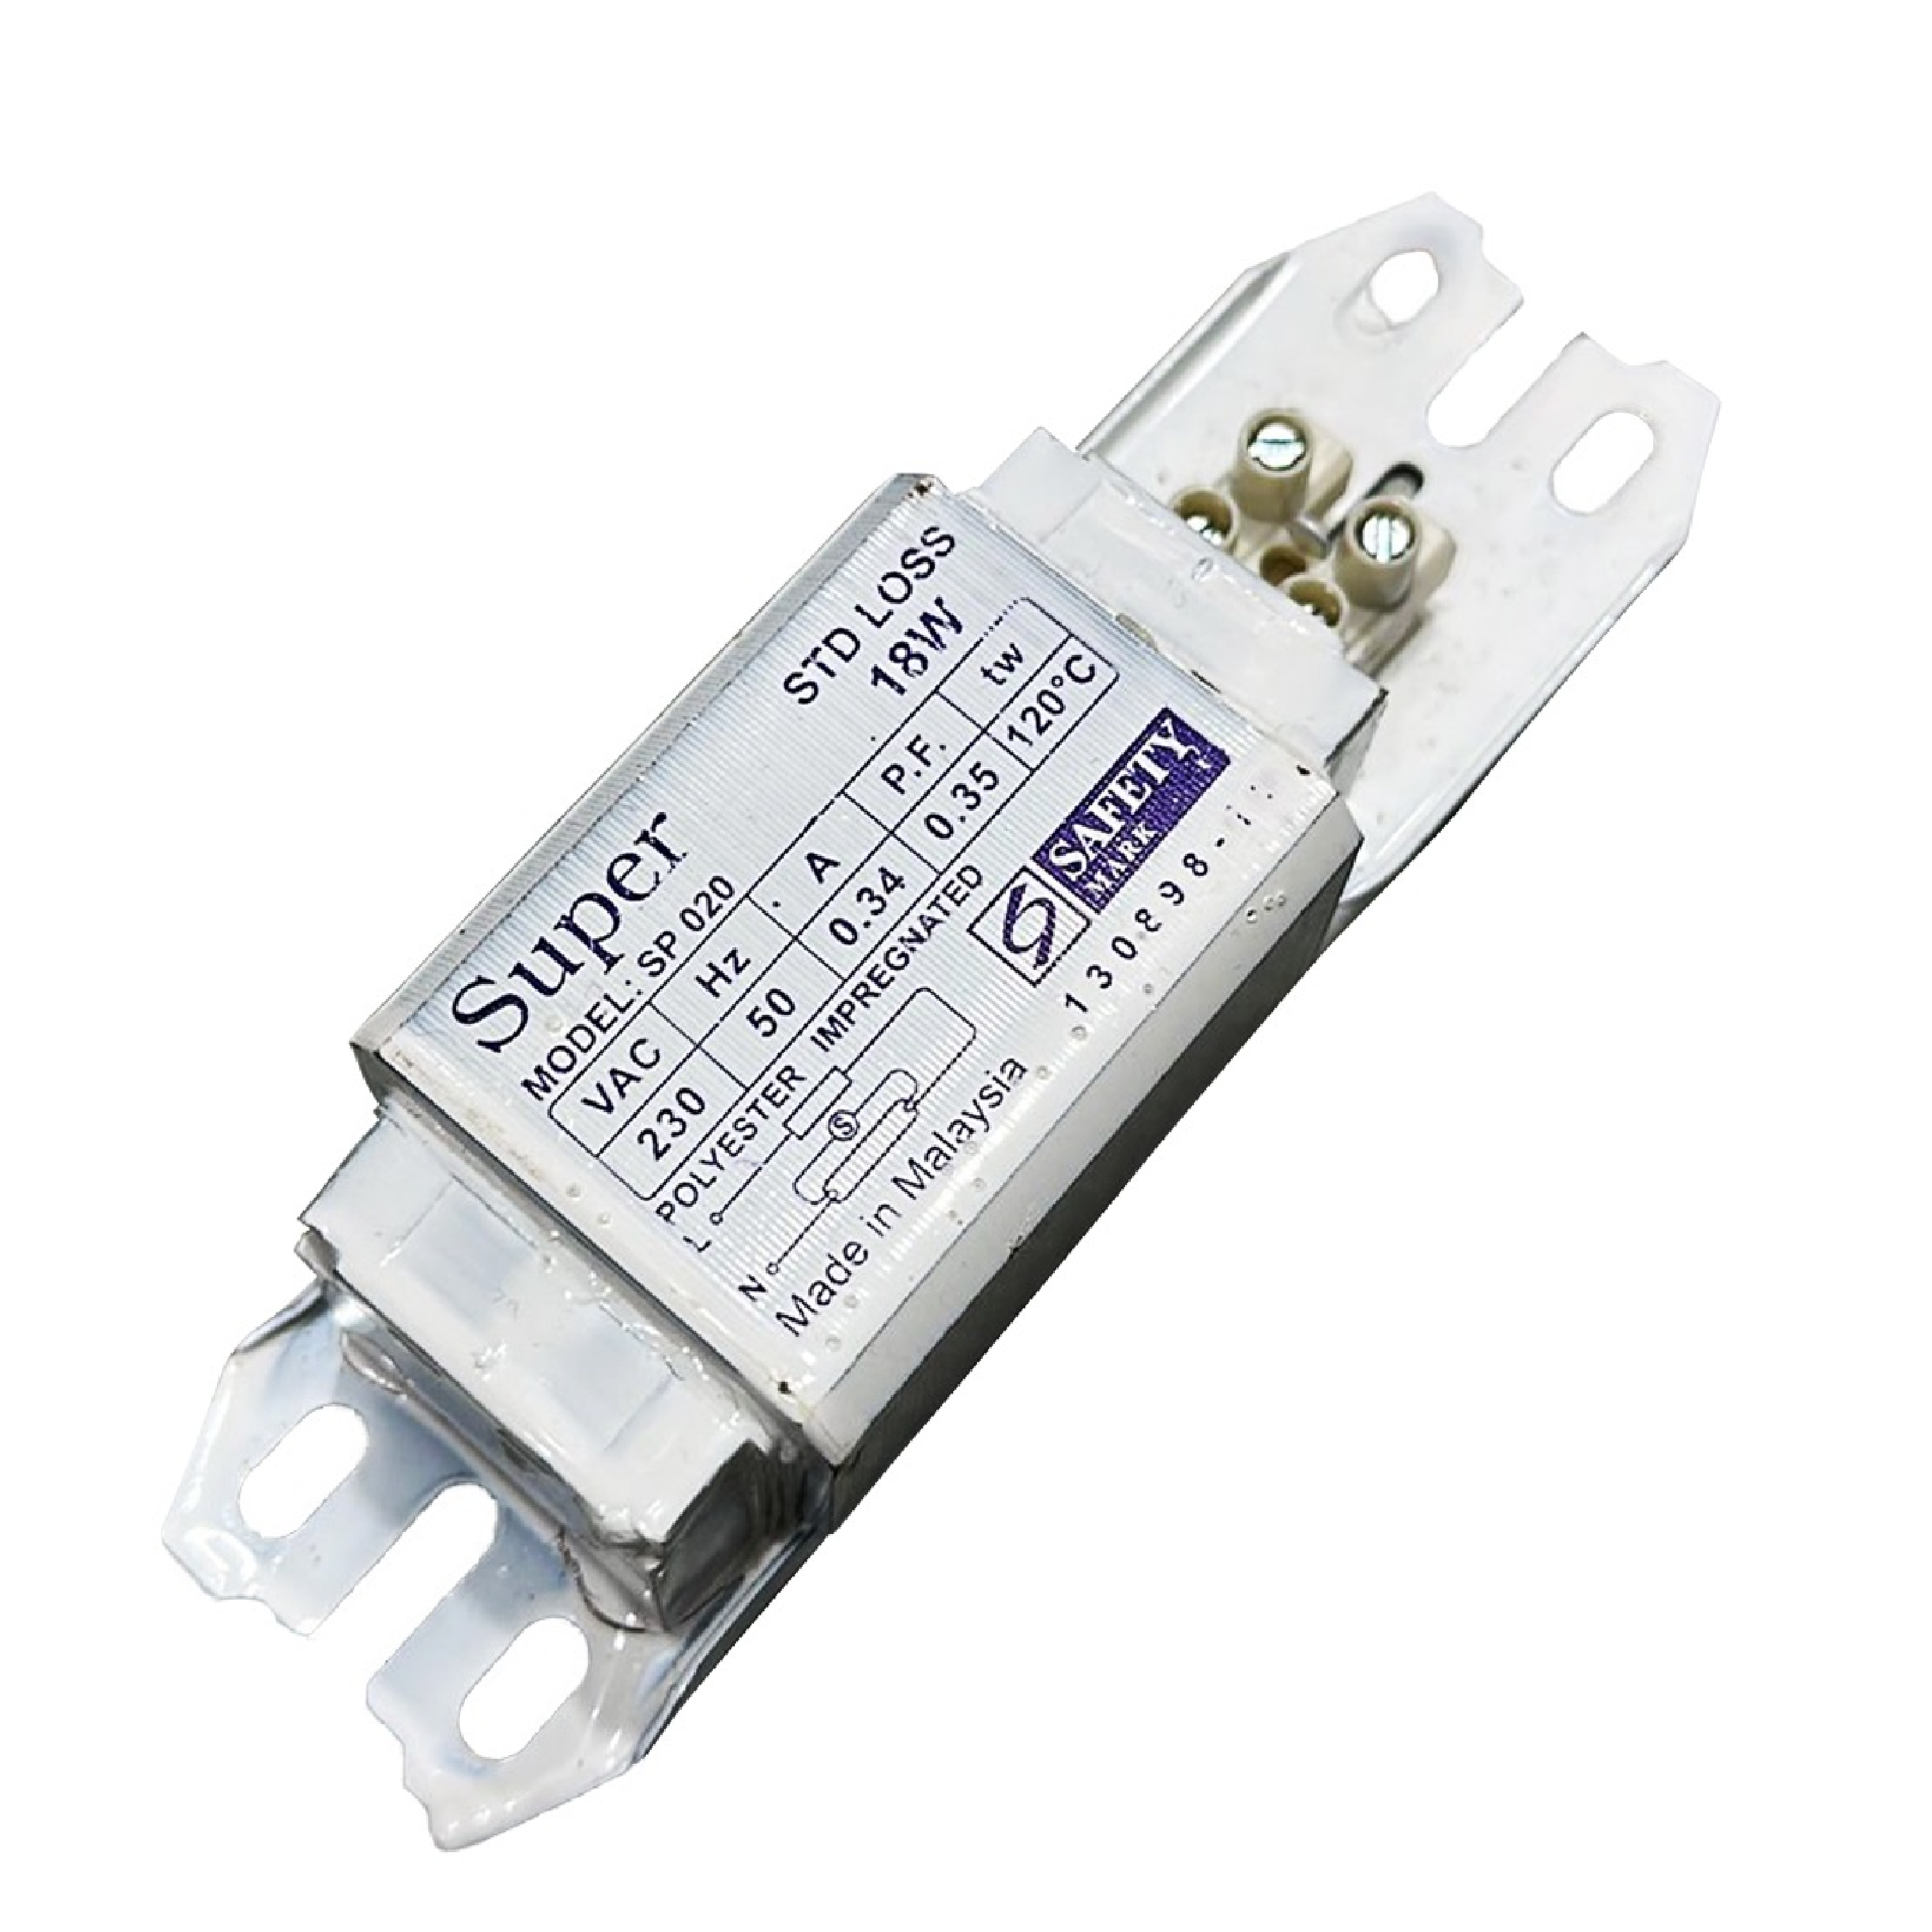 SUPER 18W Electrical Ballast For Fluorescent Lights